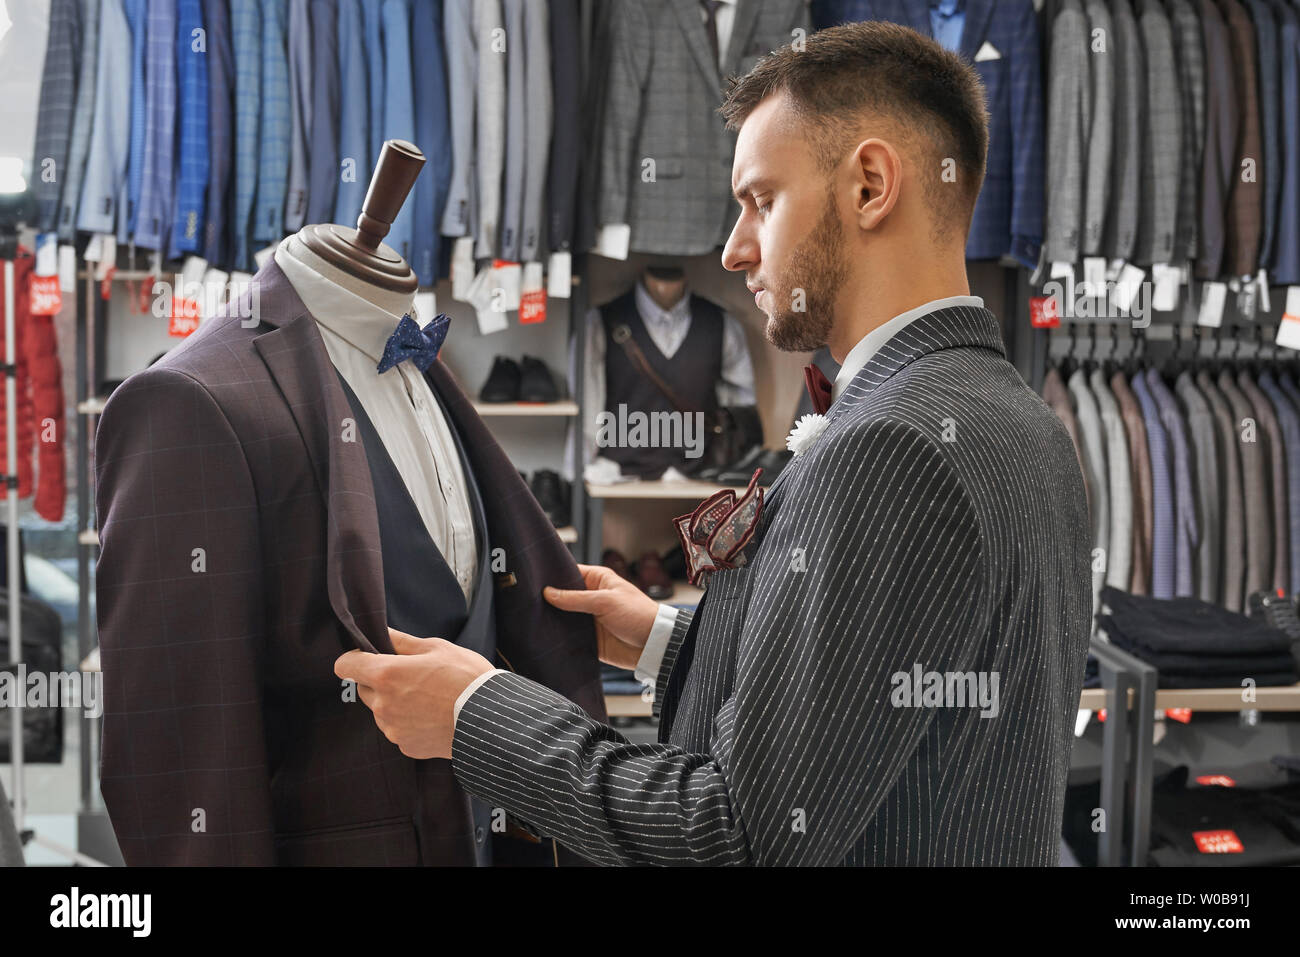 Young, handsome man choosing suit in fashionable boutique. Jackets of fashionable prints on hangers in row, clothing and footwear on shelves. Male clothing on mannequin. Stock Photo